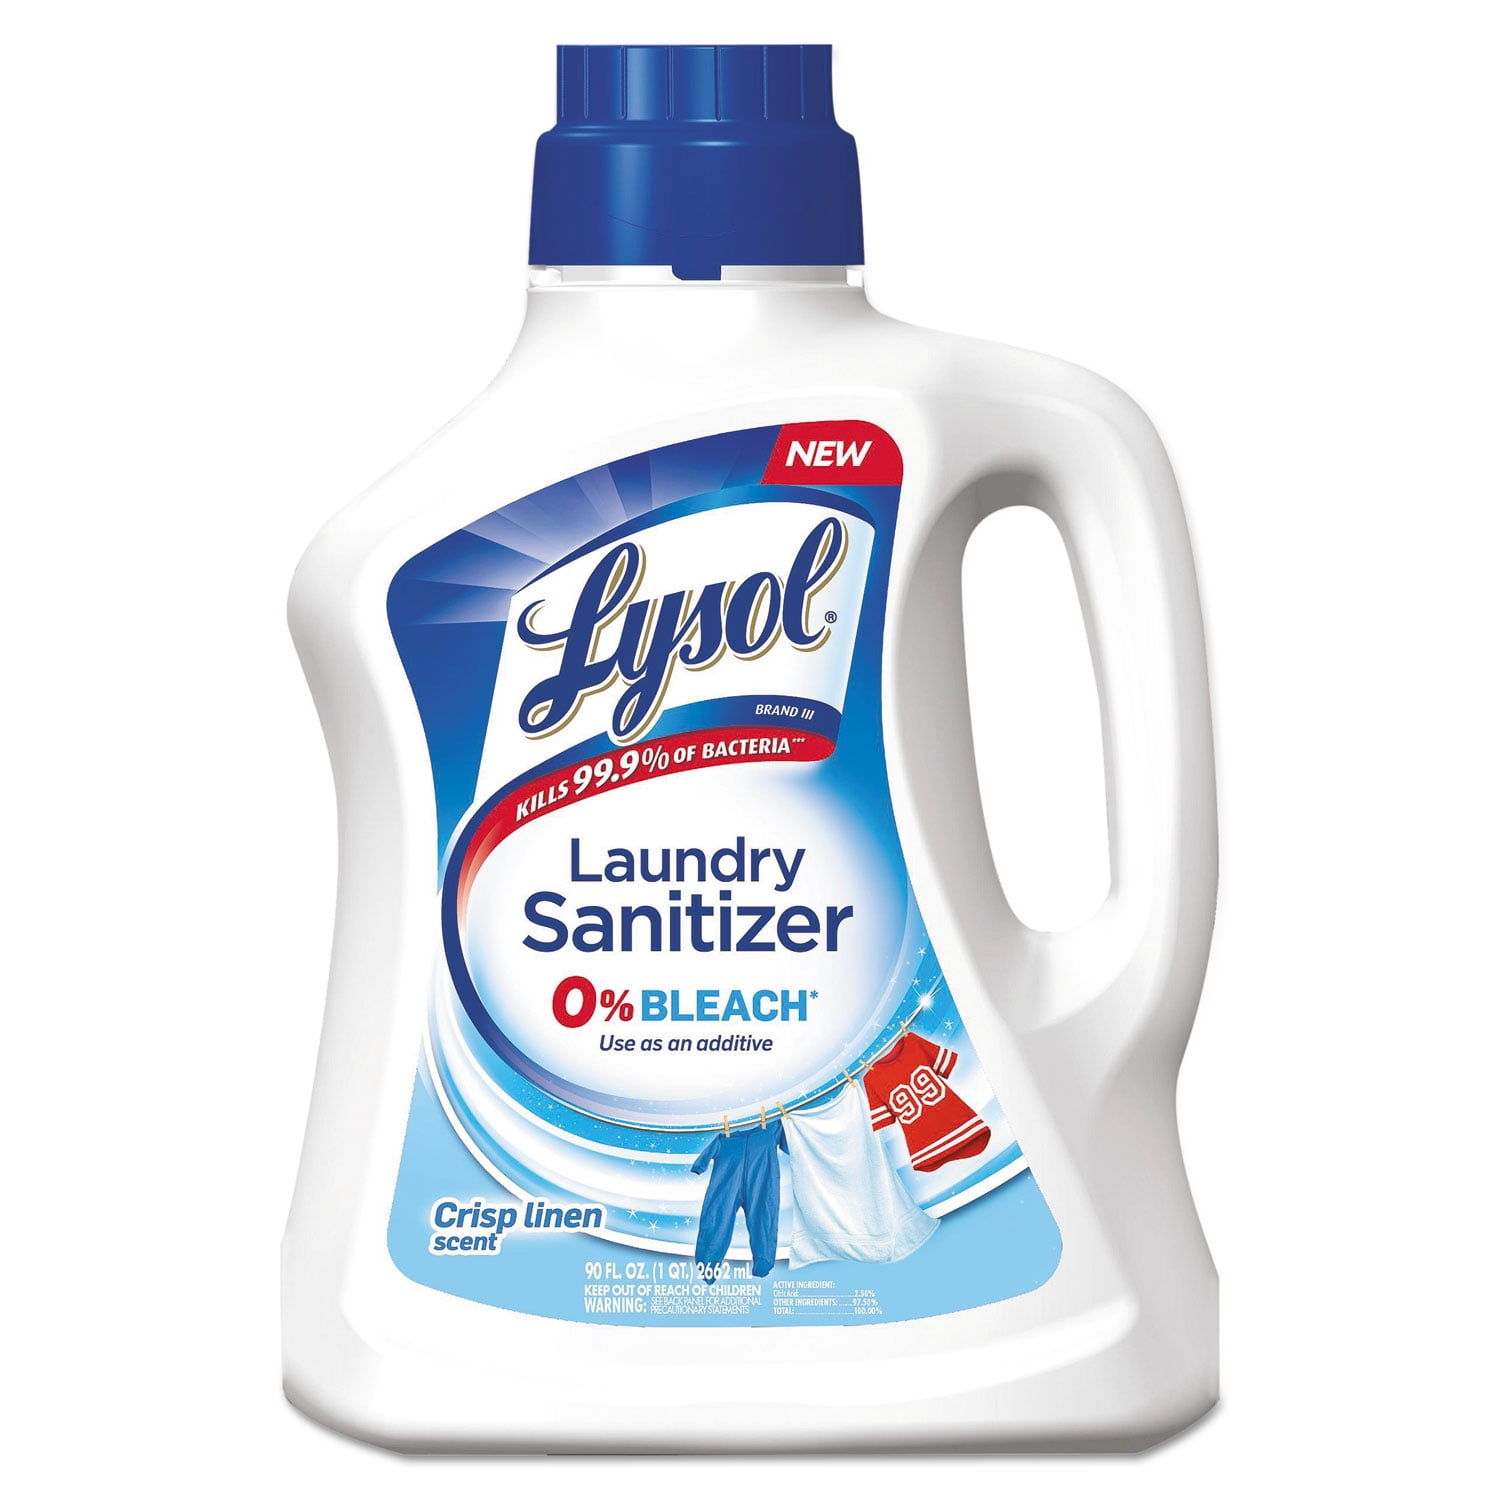 Can Lysol Laundry Sanitizer Causes Rash